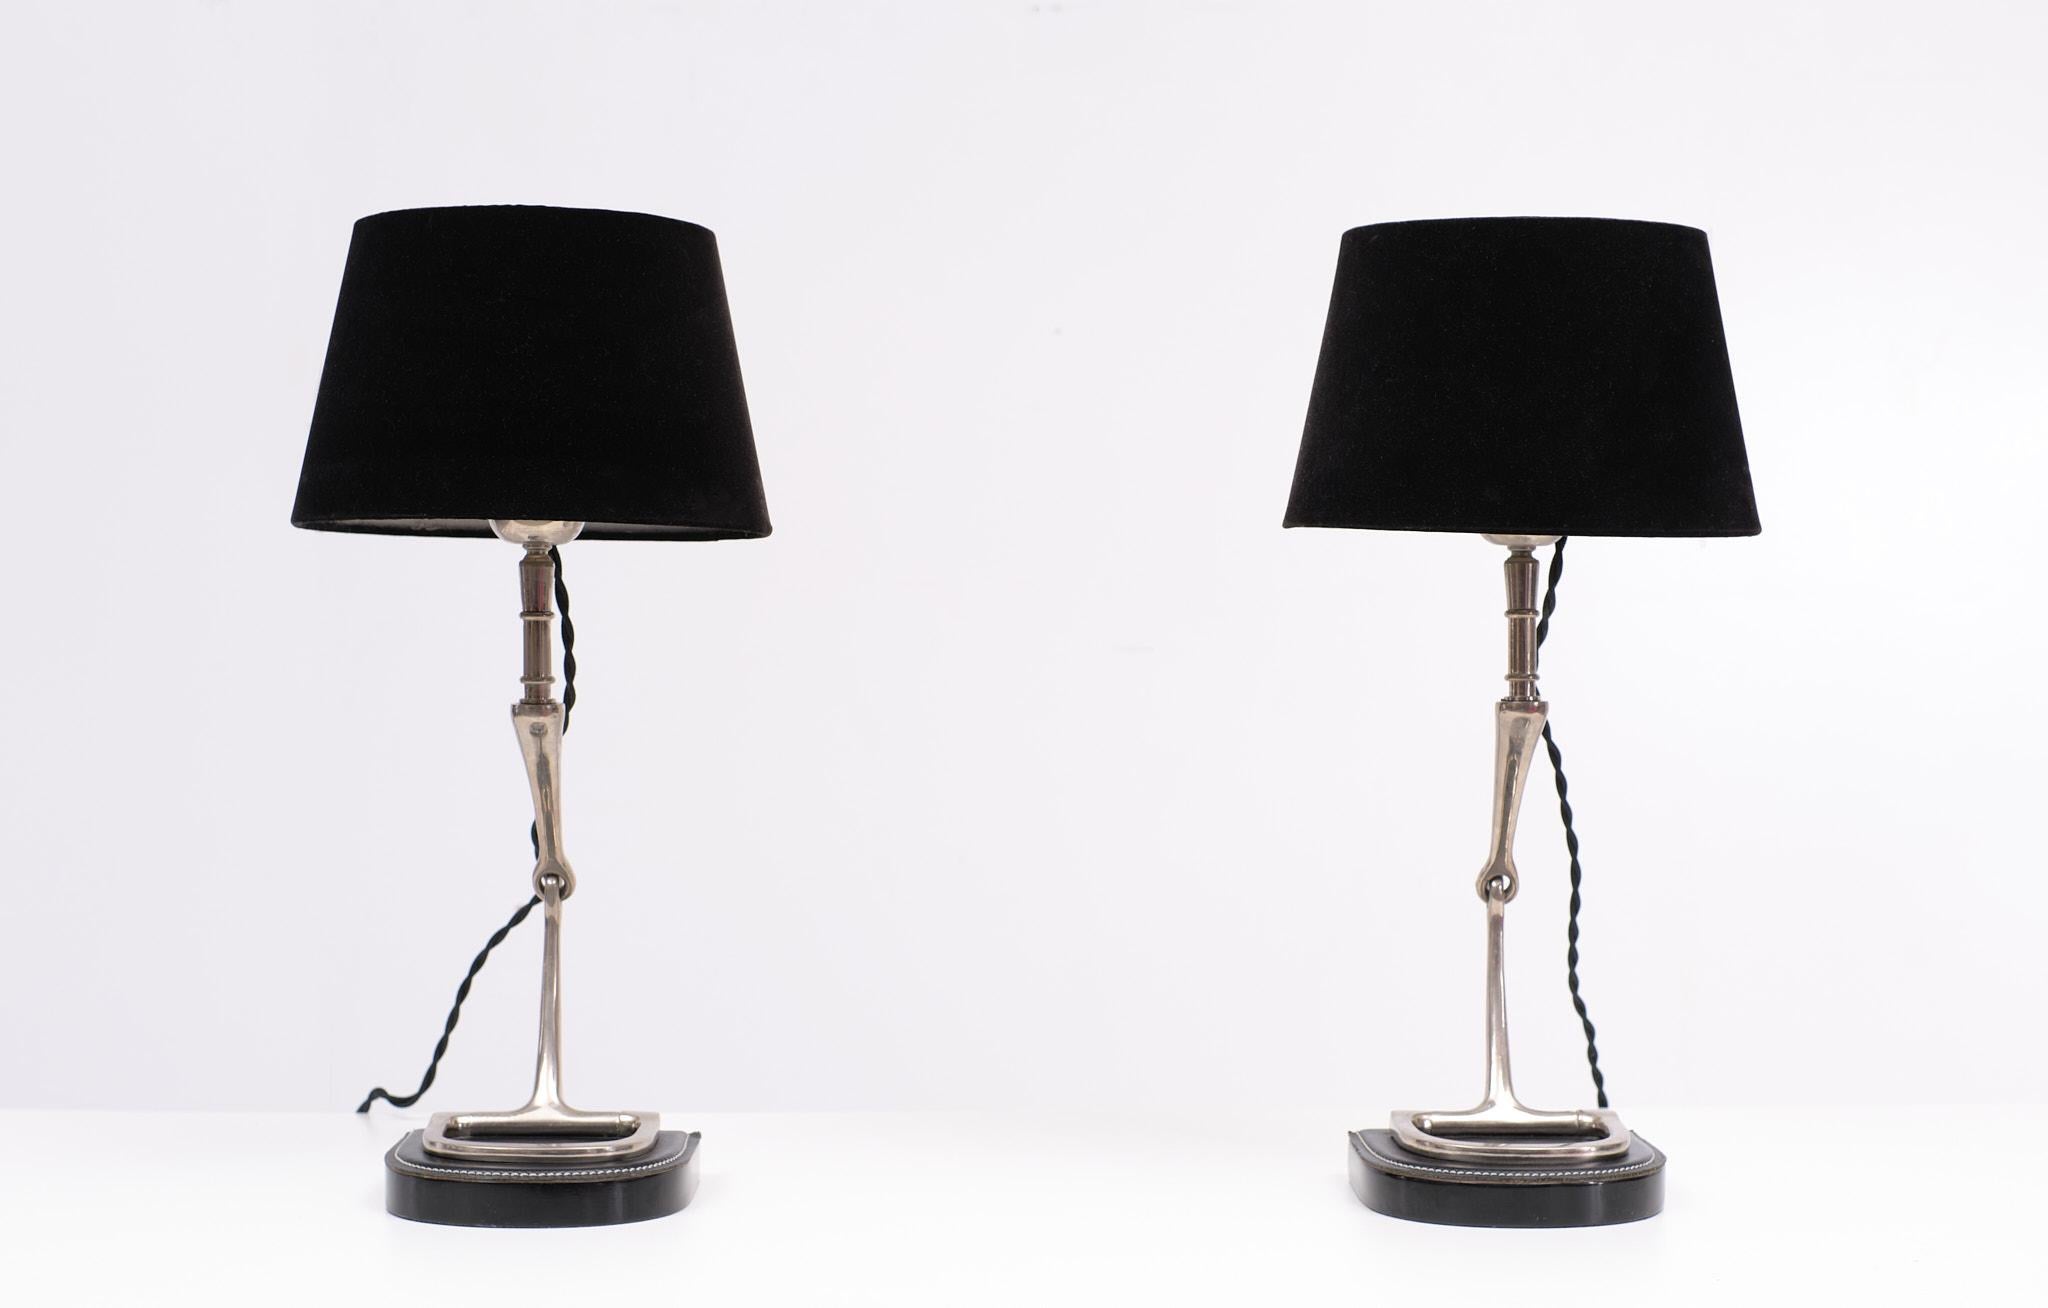 Two exceptional table lamps Chrome stirrups on a stich leather base, comes 
with Black Velvet shades. So stylish. Large E27 bulb needed. Manufactured 
by quality firm Eicholtz Netherlands, 1980s.